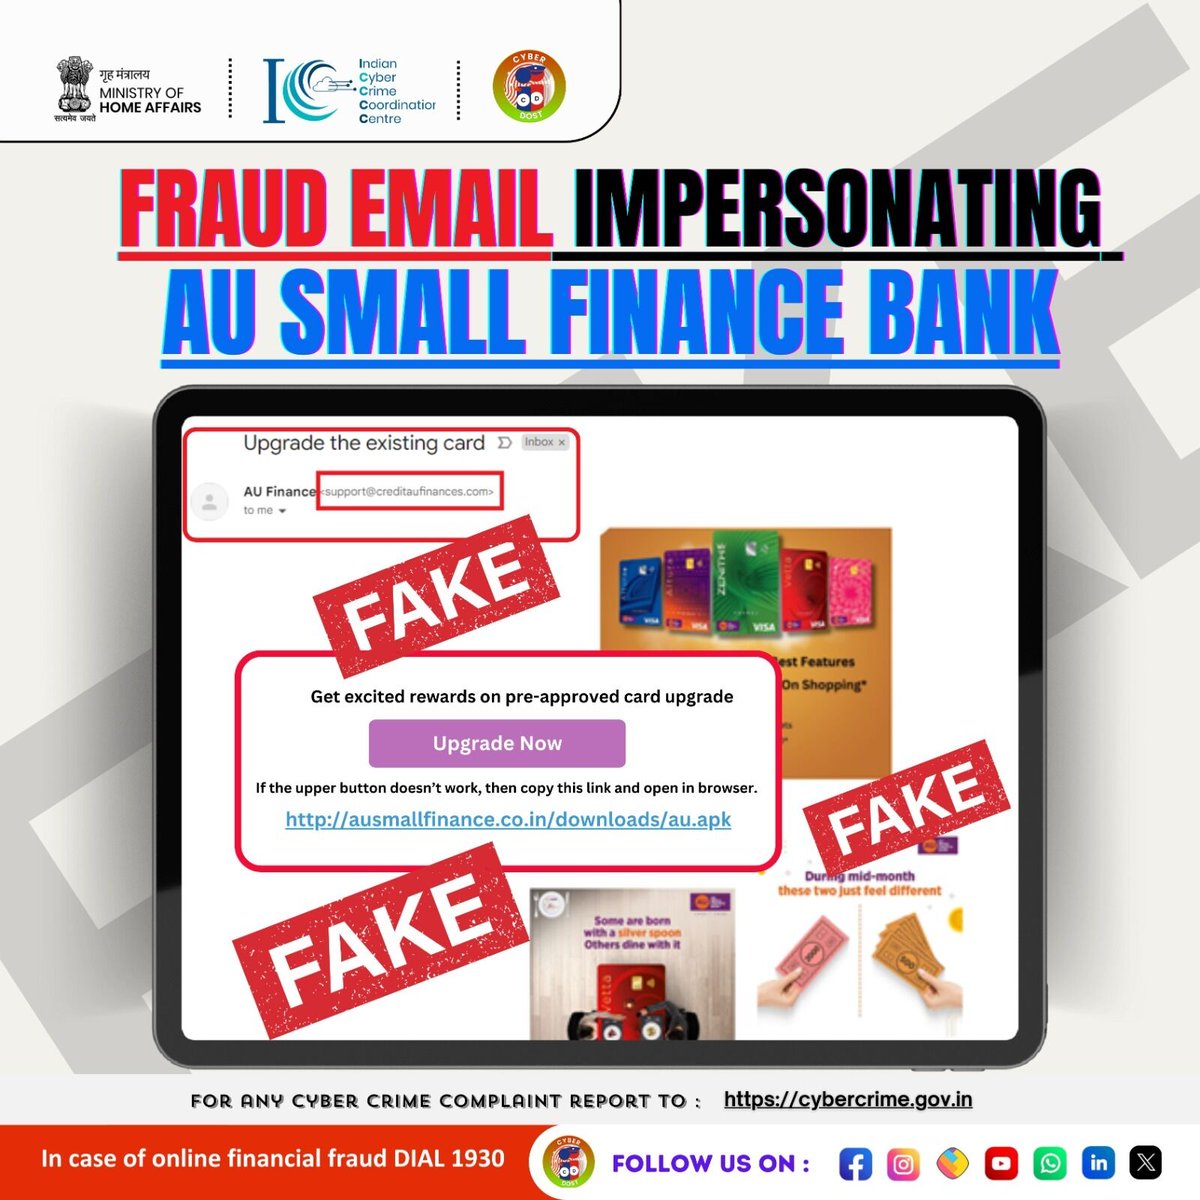 Beware of Potential Phishing Attempt - Exercise Caution Before Clicking Links or Providing Information CyberSecurity #StayCyberWise #I4C #MHA